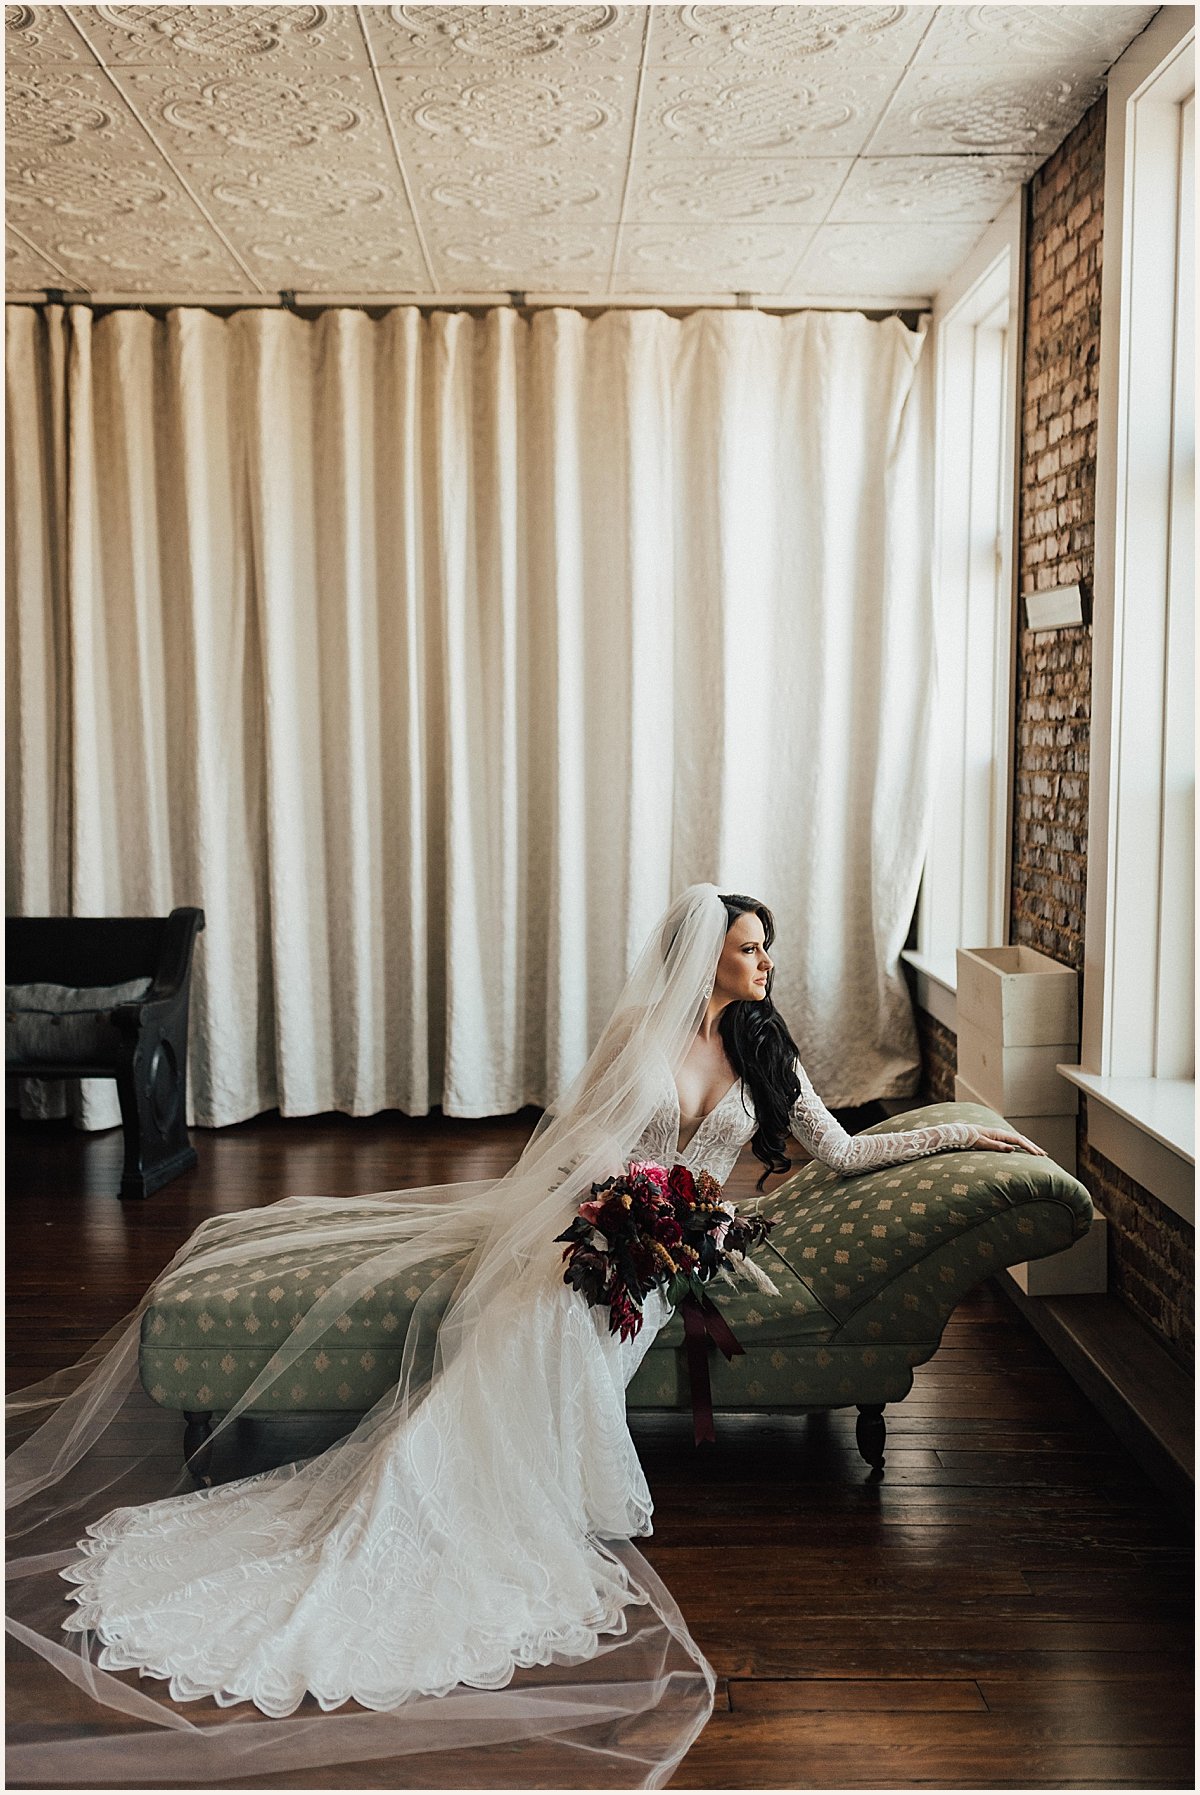 Bride sitting on couch looking out window | Lauren Parr Photography